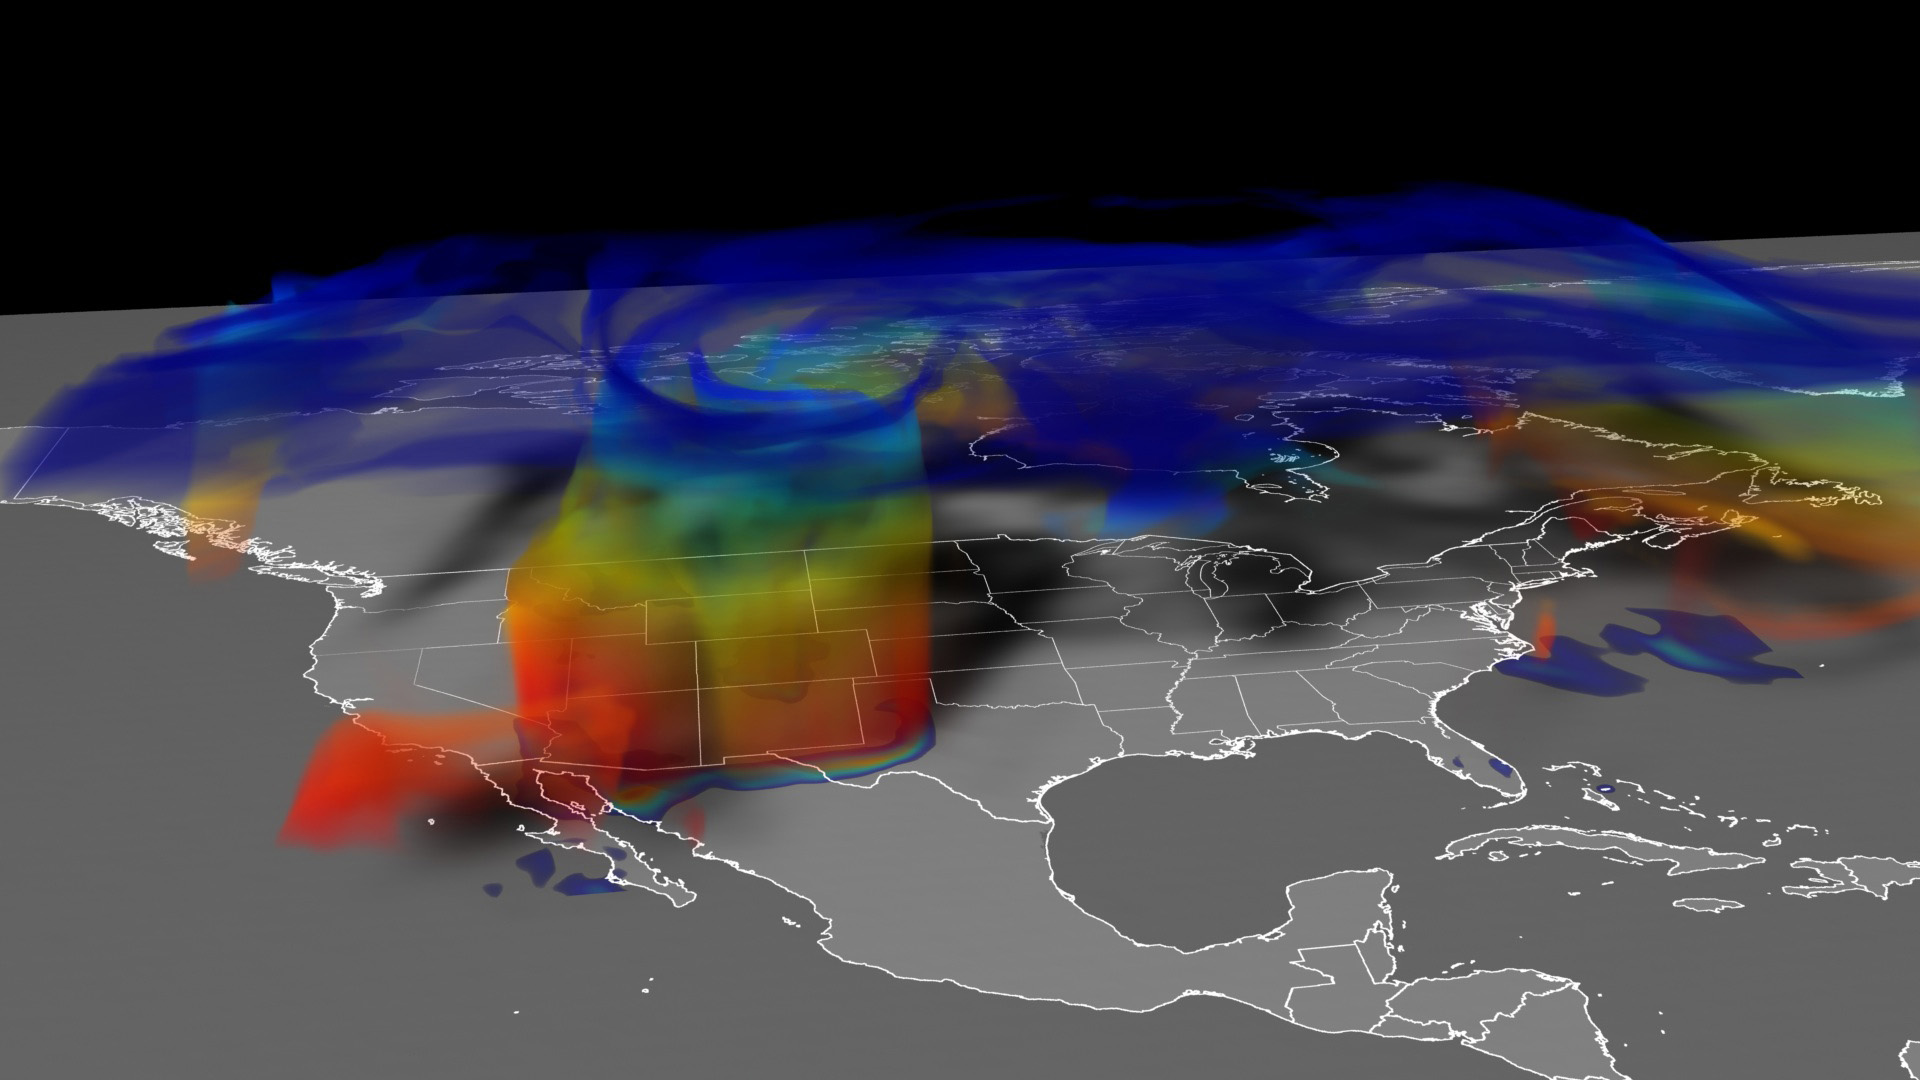 Ozone descends to Earth’s surface, with consequences for air quality.